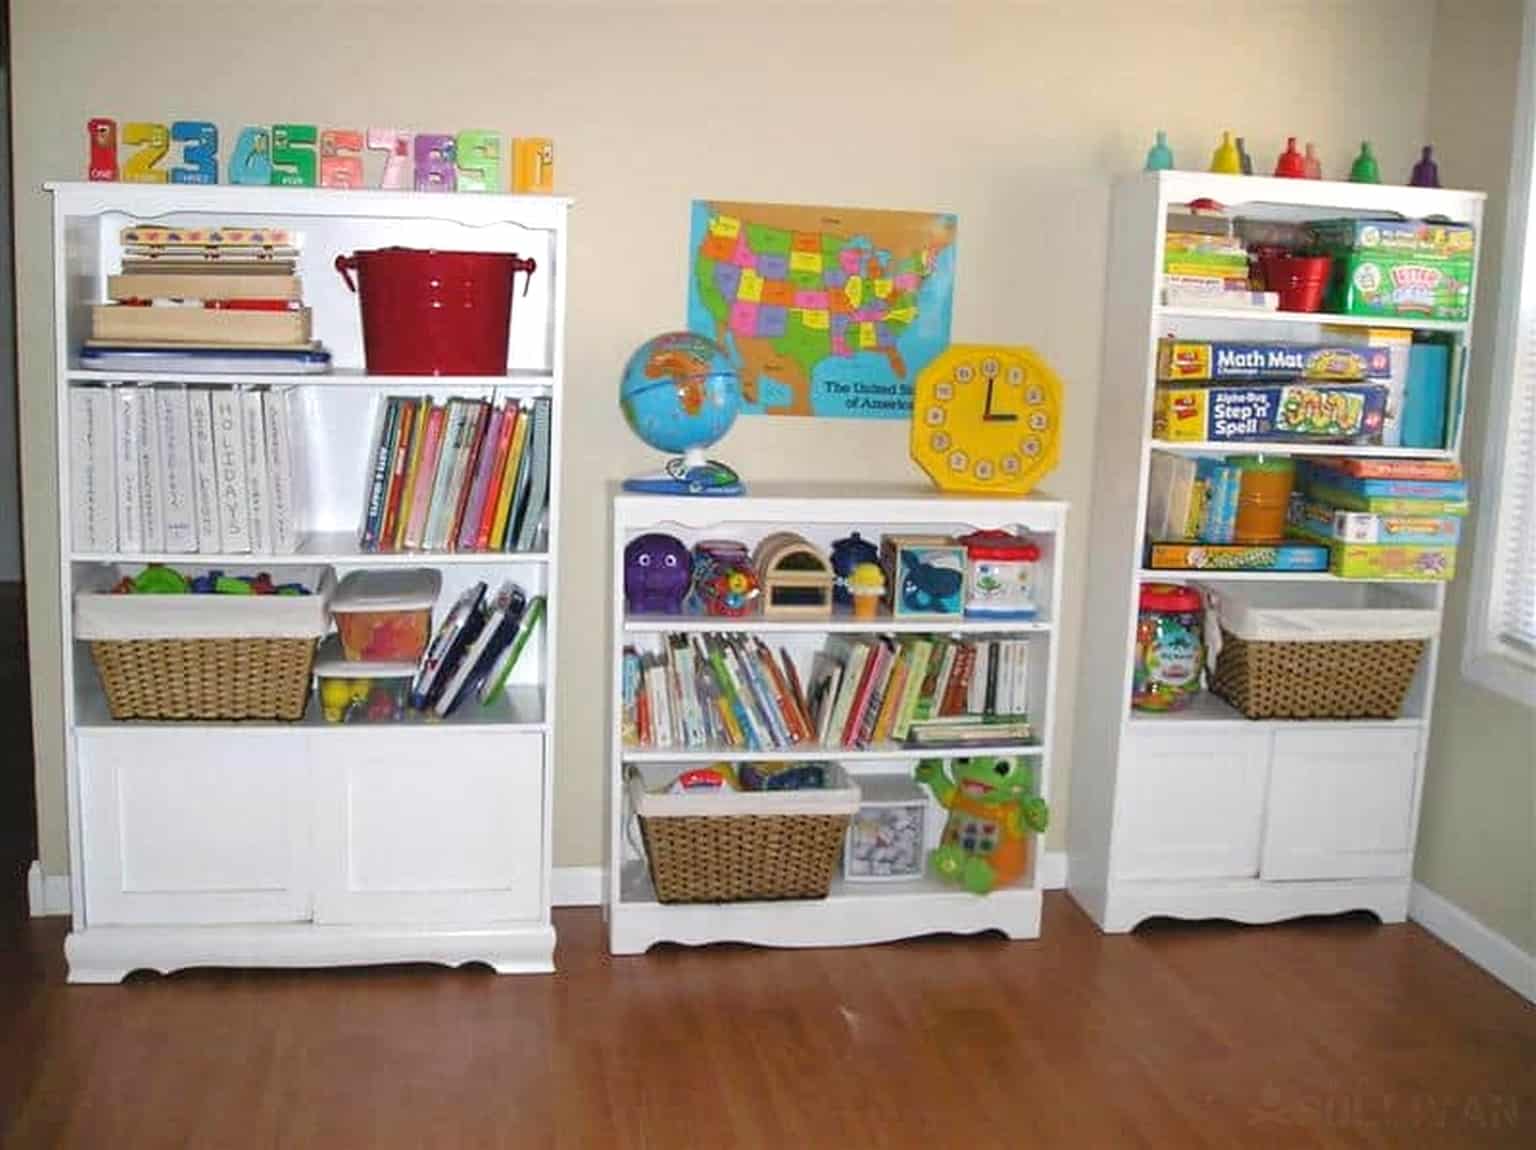 toys and books on bookshelves in homeschooling classroom